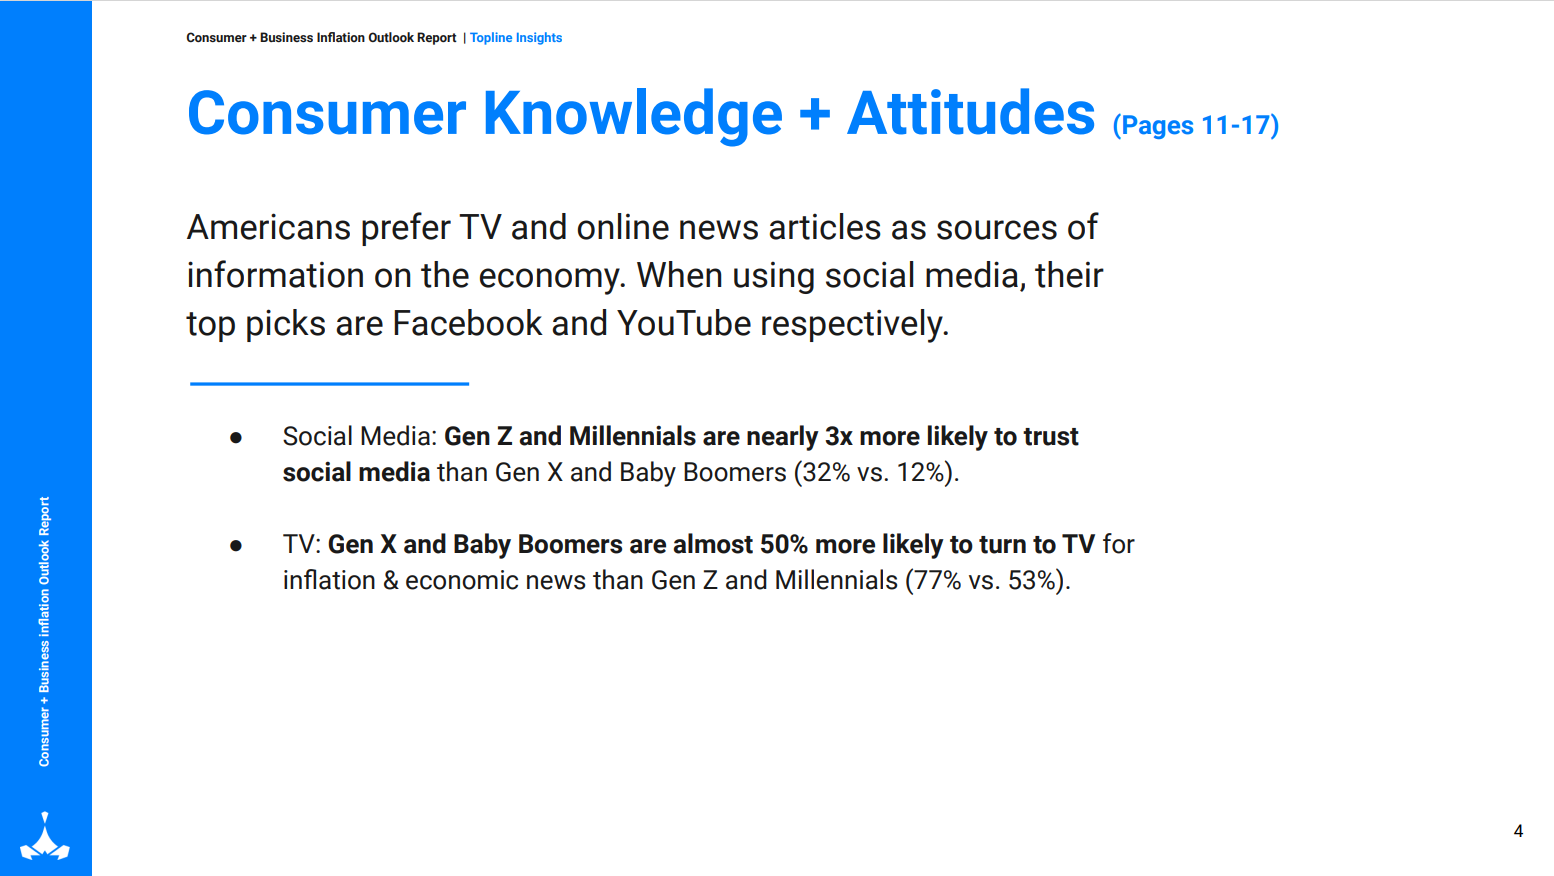 Gen Z and millennials are more likely to spend now than Gen X and boomers page 11 - 17